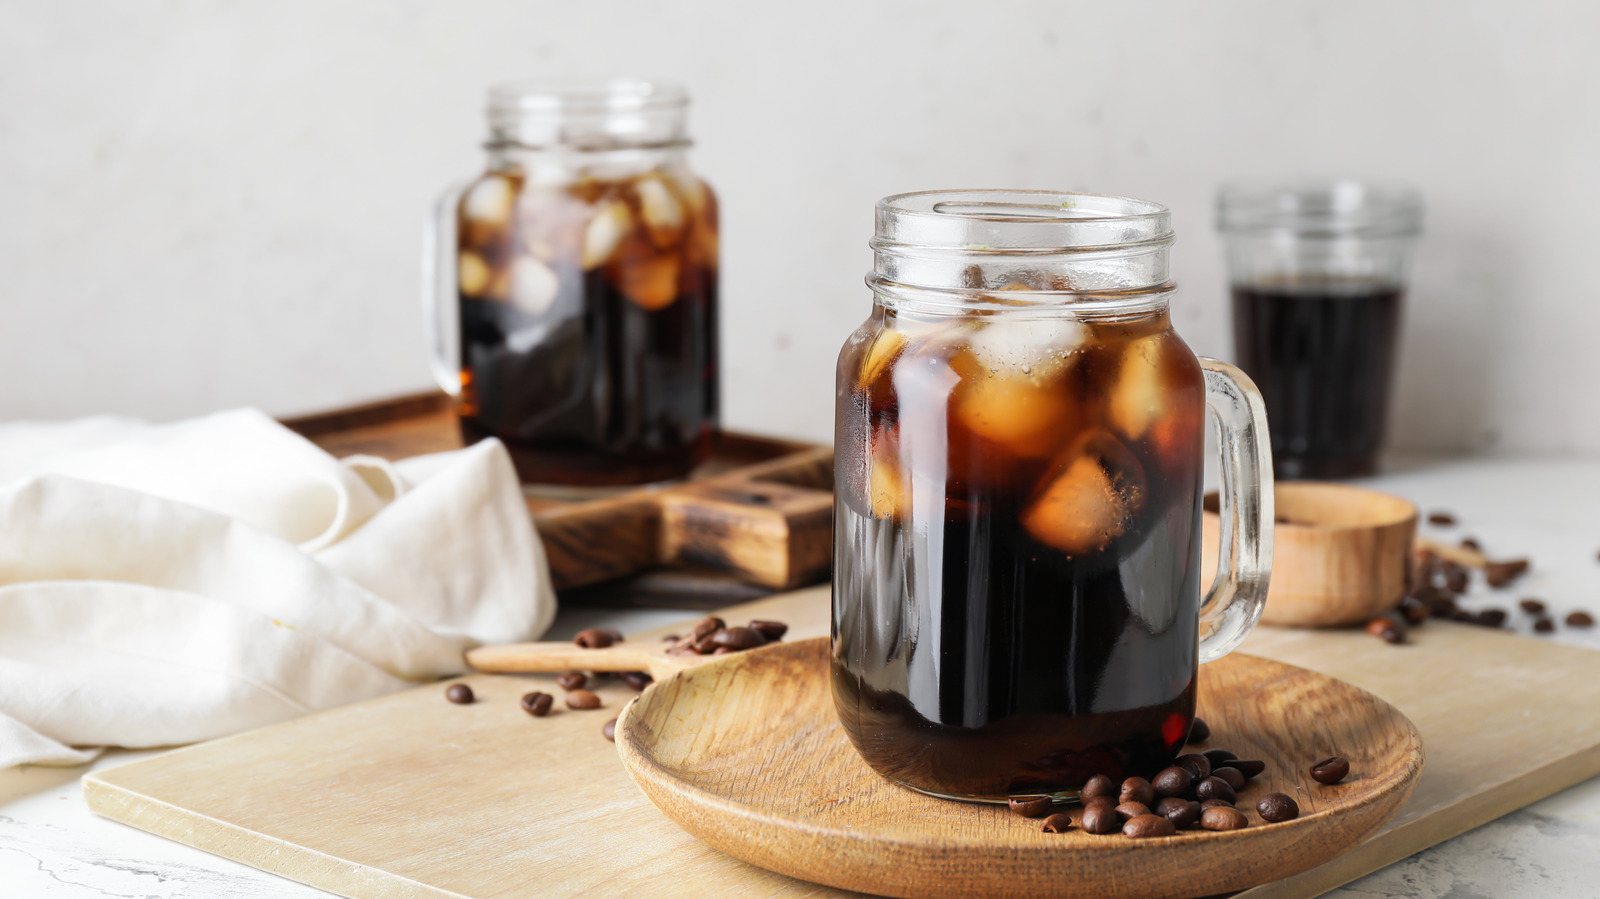 Trader Joe's Cold Brew Coffee Ready To Drink 